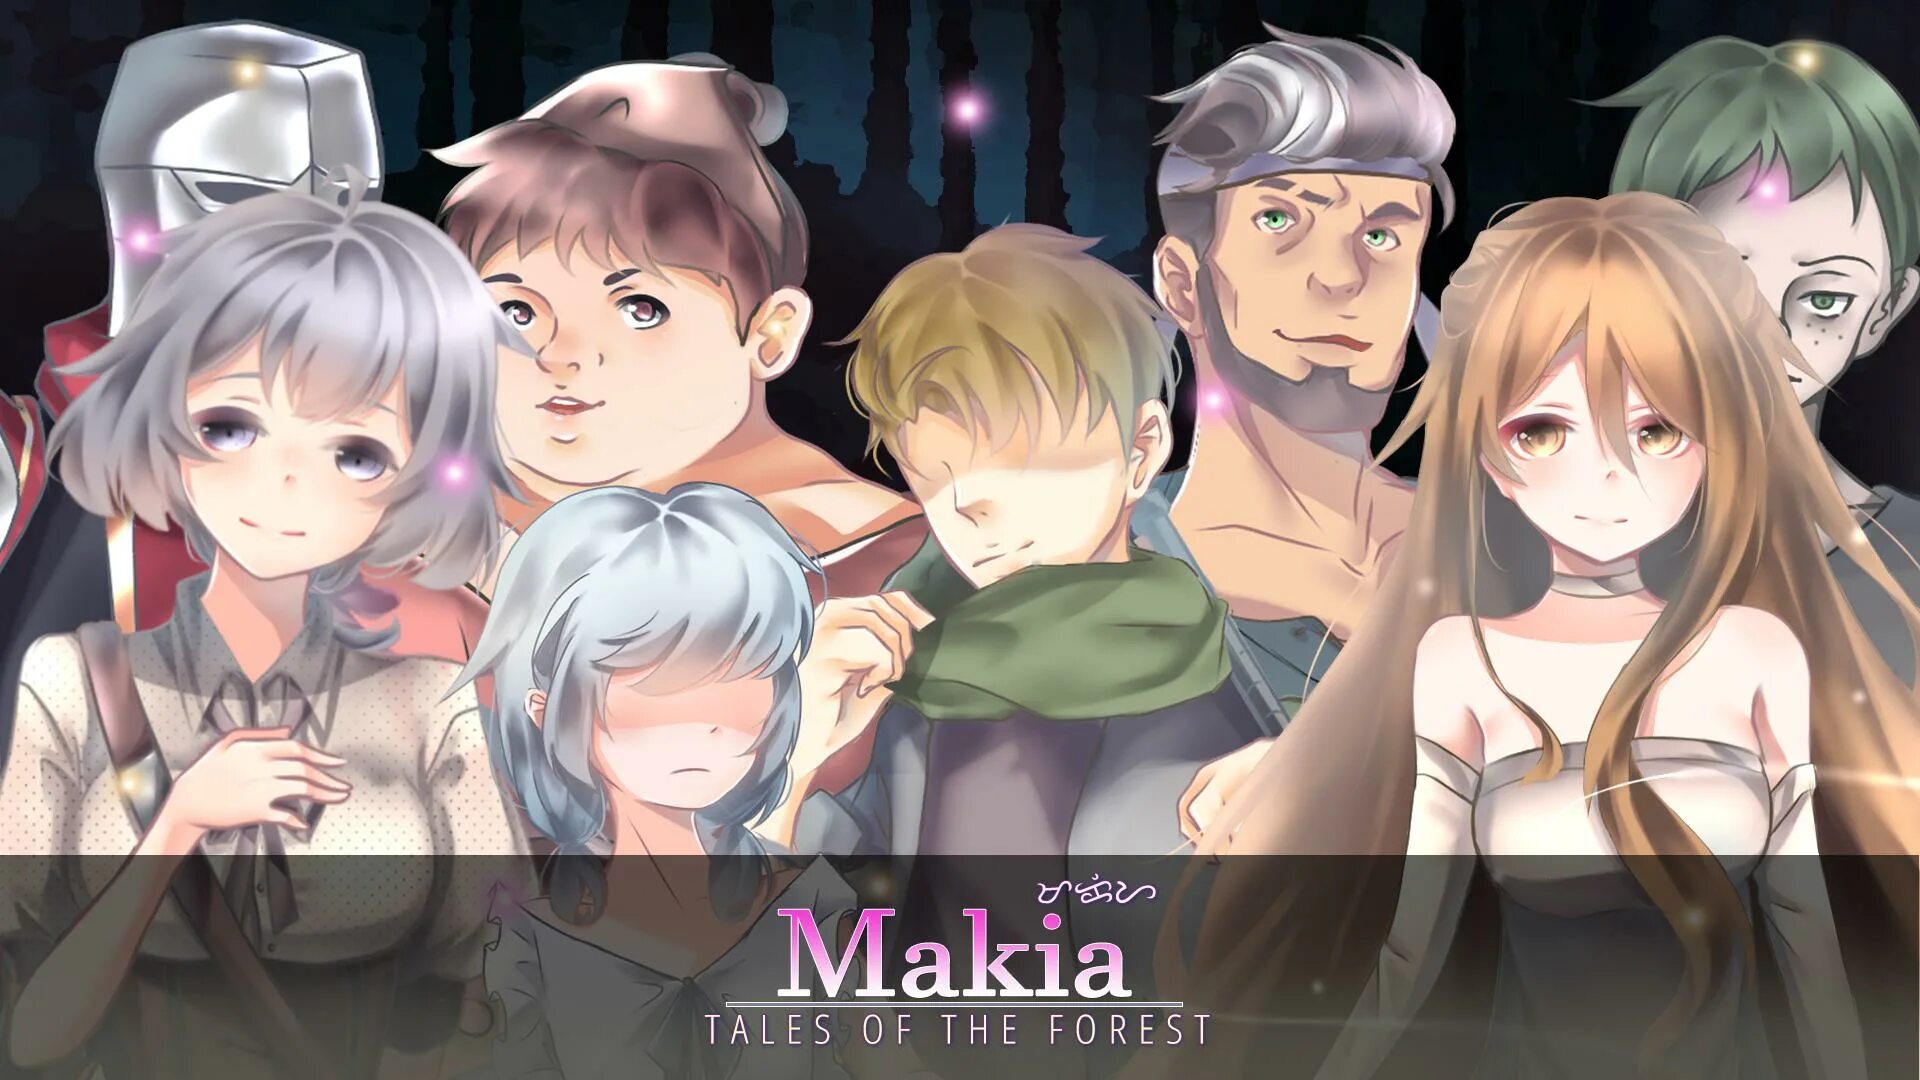 Forest визуальная новелла. Makia. ВРКС Макиа. Into the Forest Visual novel.